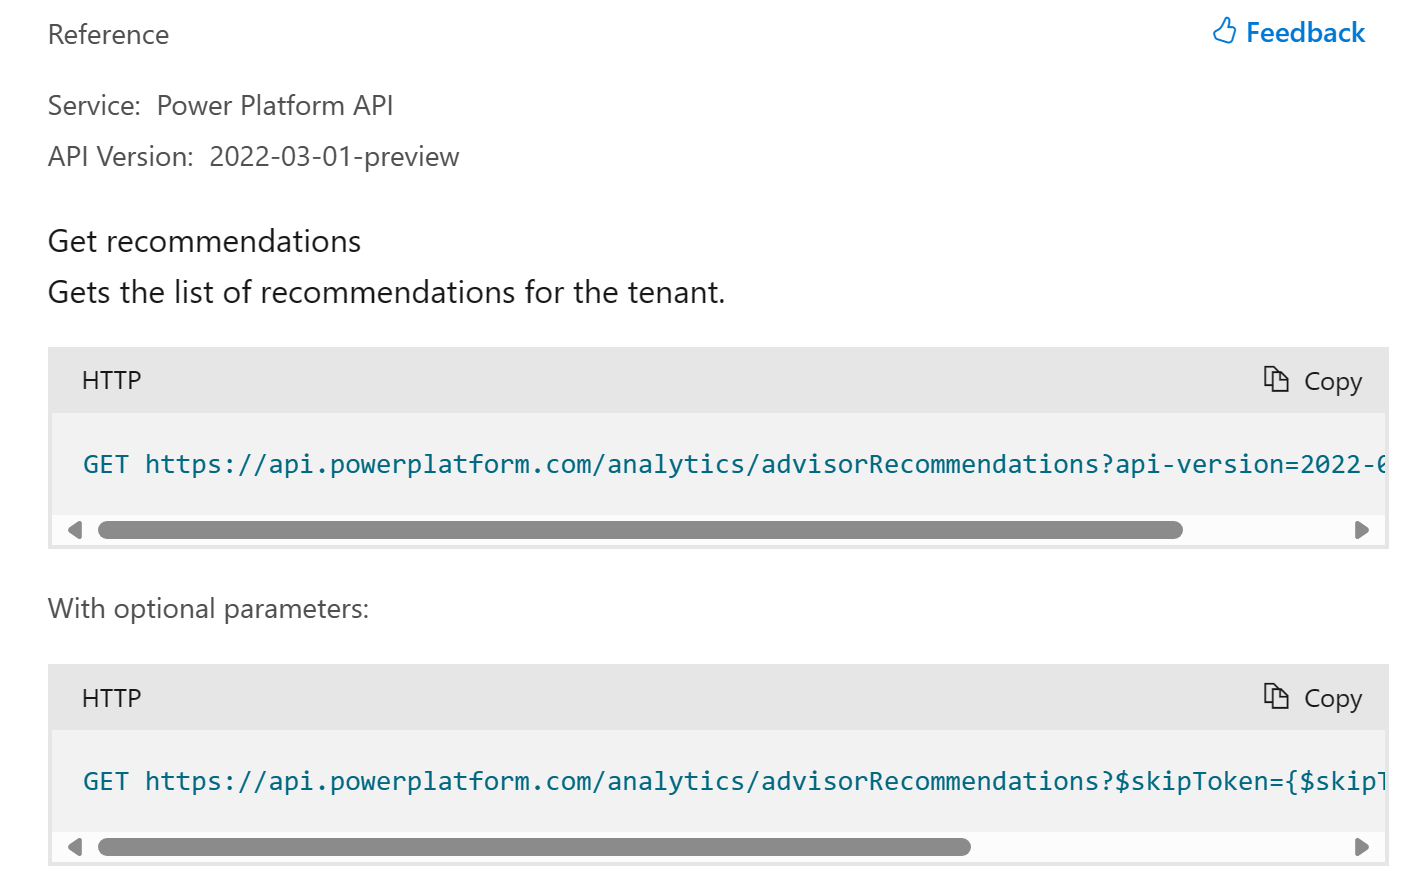 Shows a restful API reference page with optional querystring parameters.